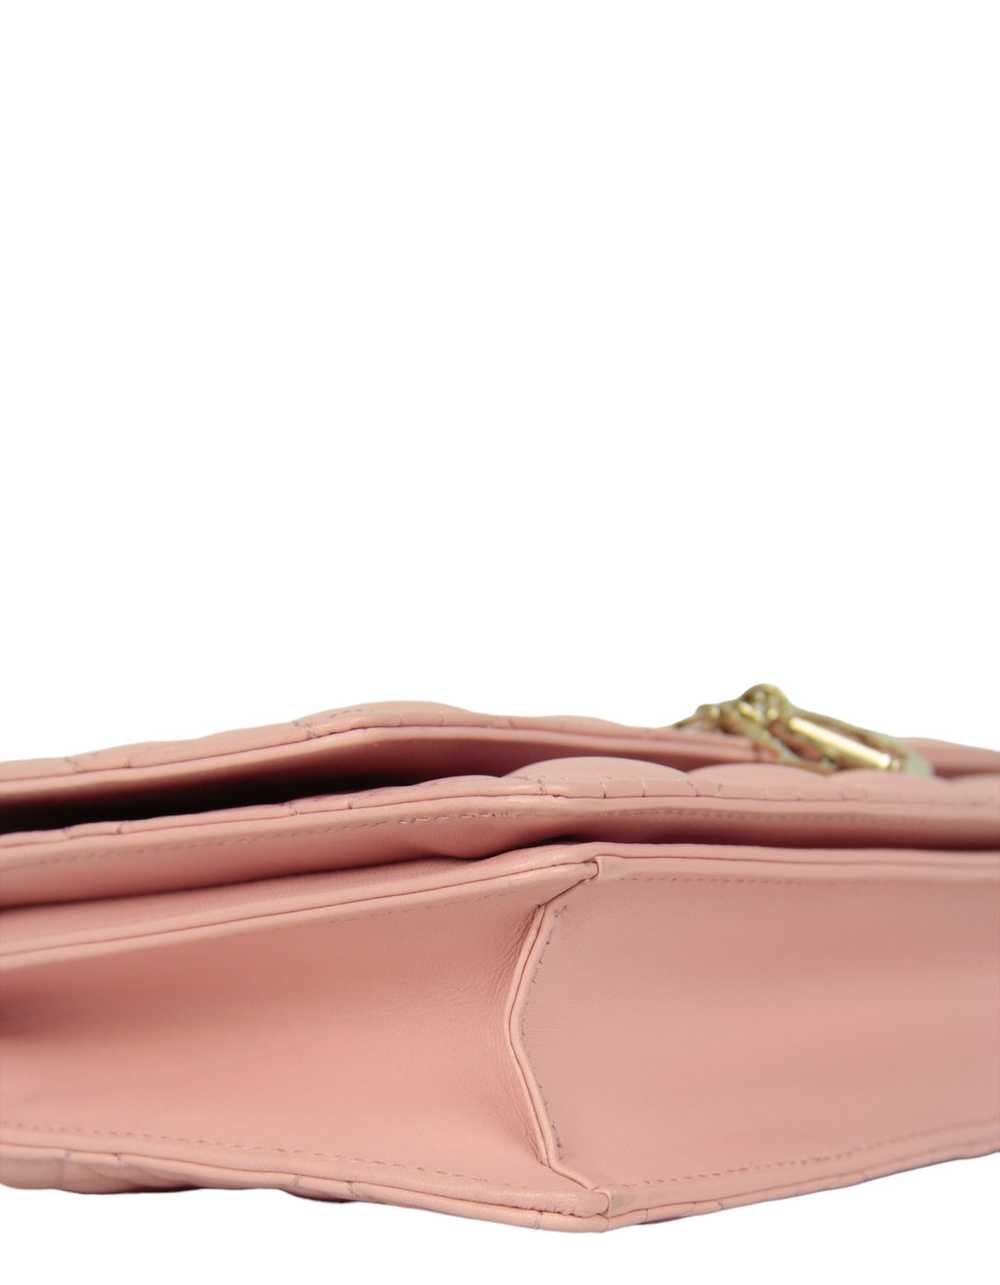 Dior Melocoton Pink Cannage Miss Dior Top Handle … - image 4